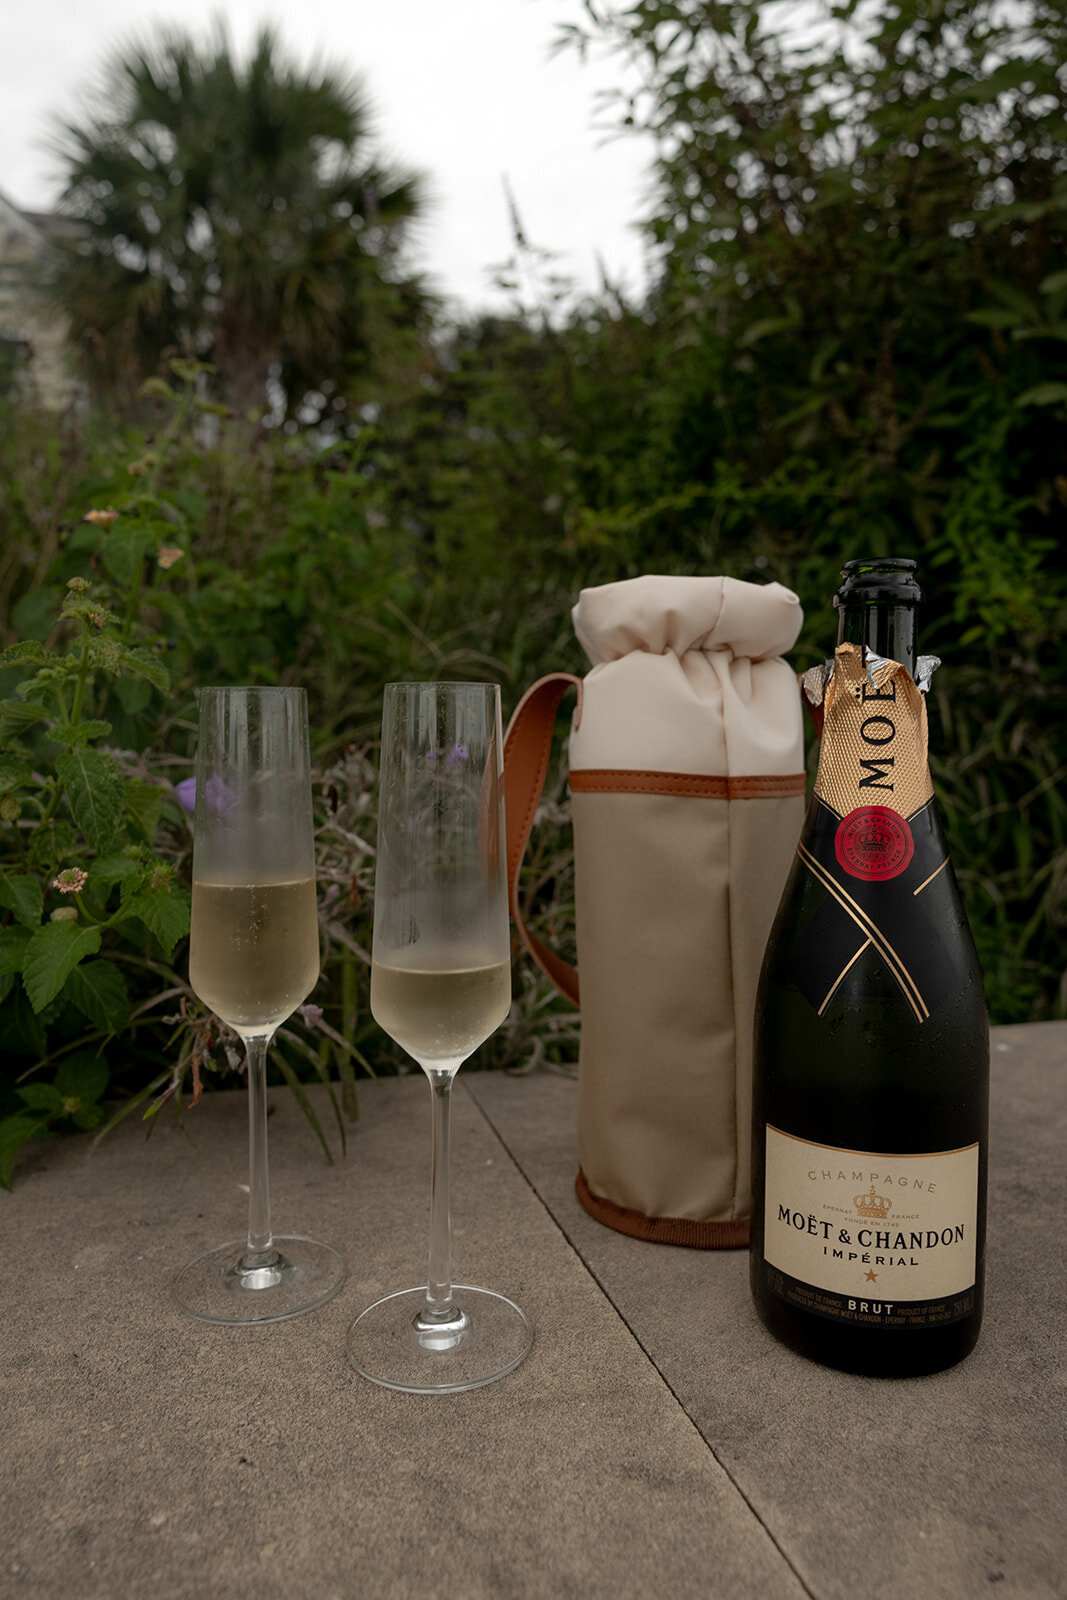 A open bottle of moet and chandon and two filles glasses for engagement photo session. Greenery in background